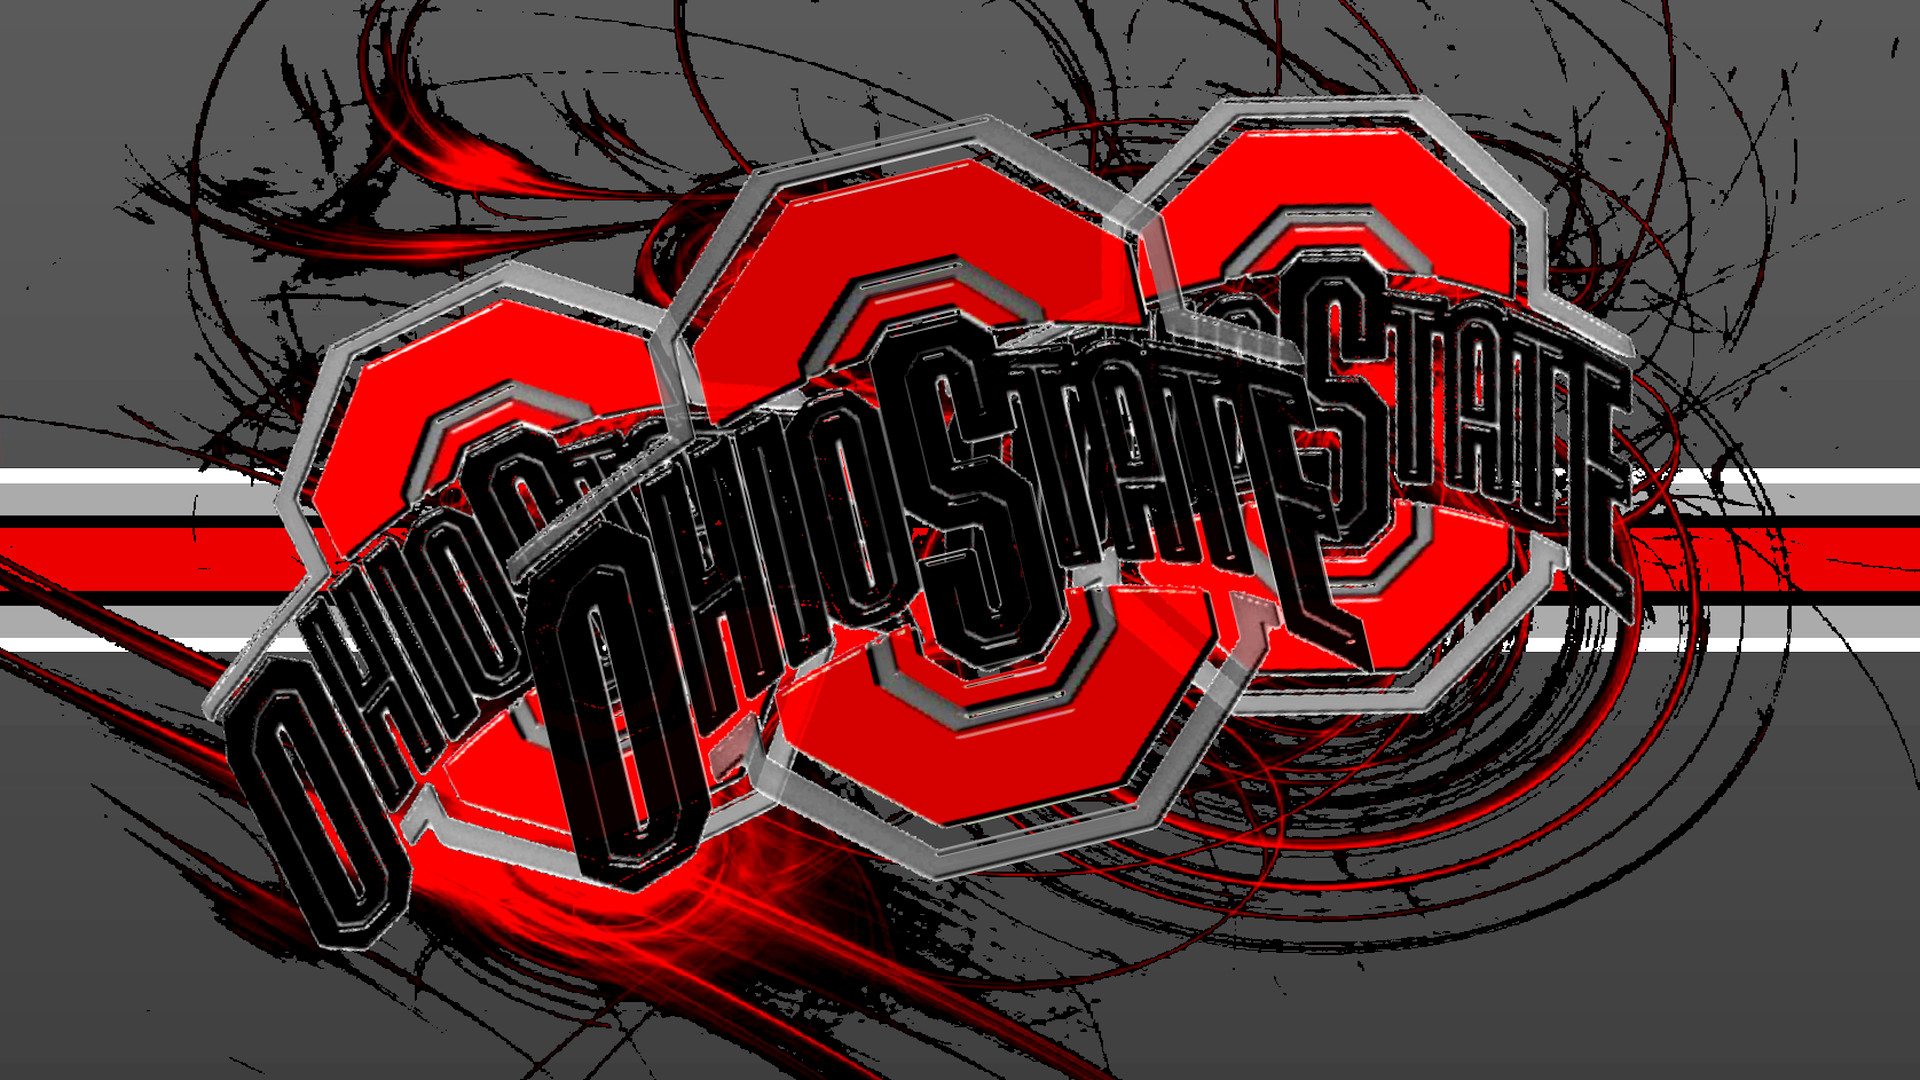 1920x1080 Ohio State Buckeyes images 3 RED BLOCK O'S WITH A BUCKEYE STRIPE HD  wallpaper and background photos